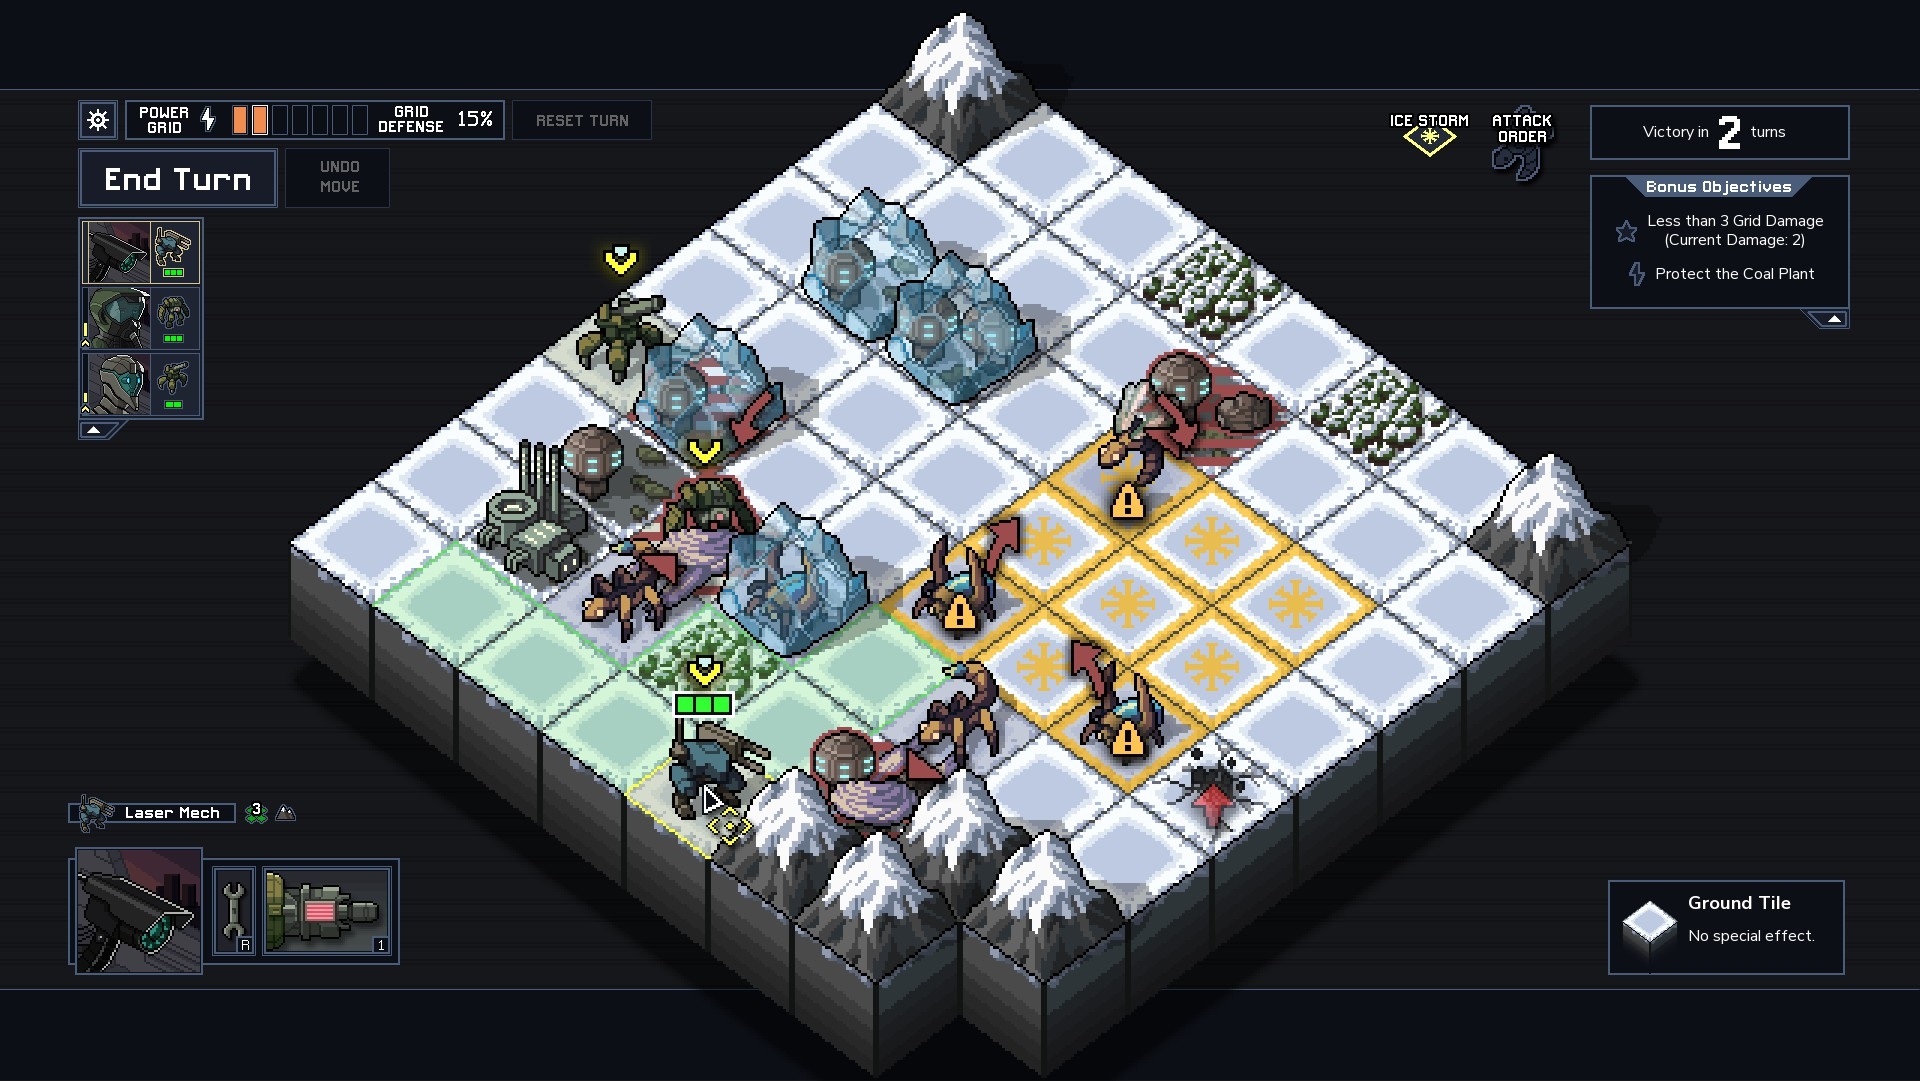 adventures into the breach download